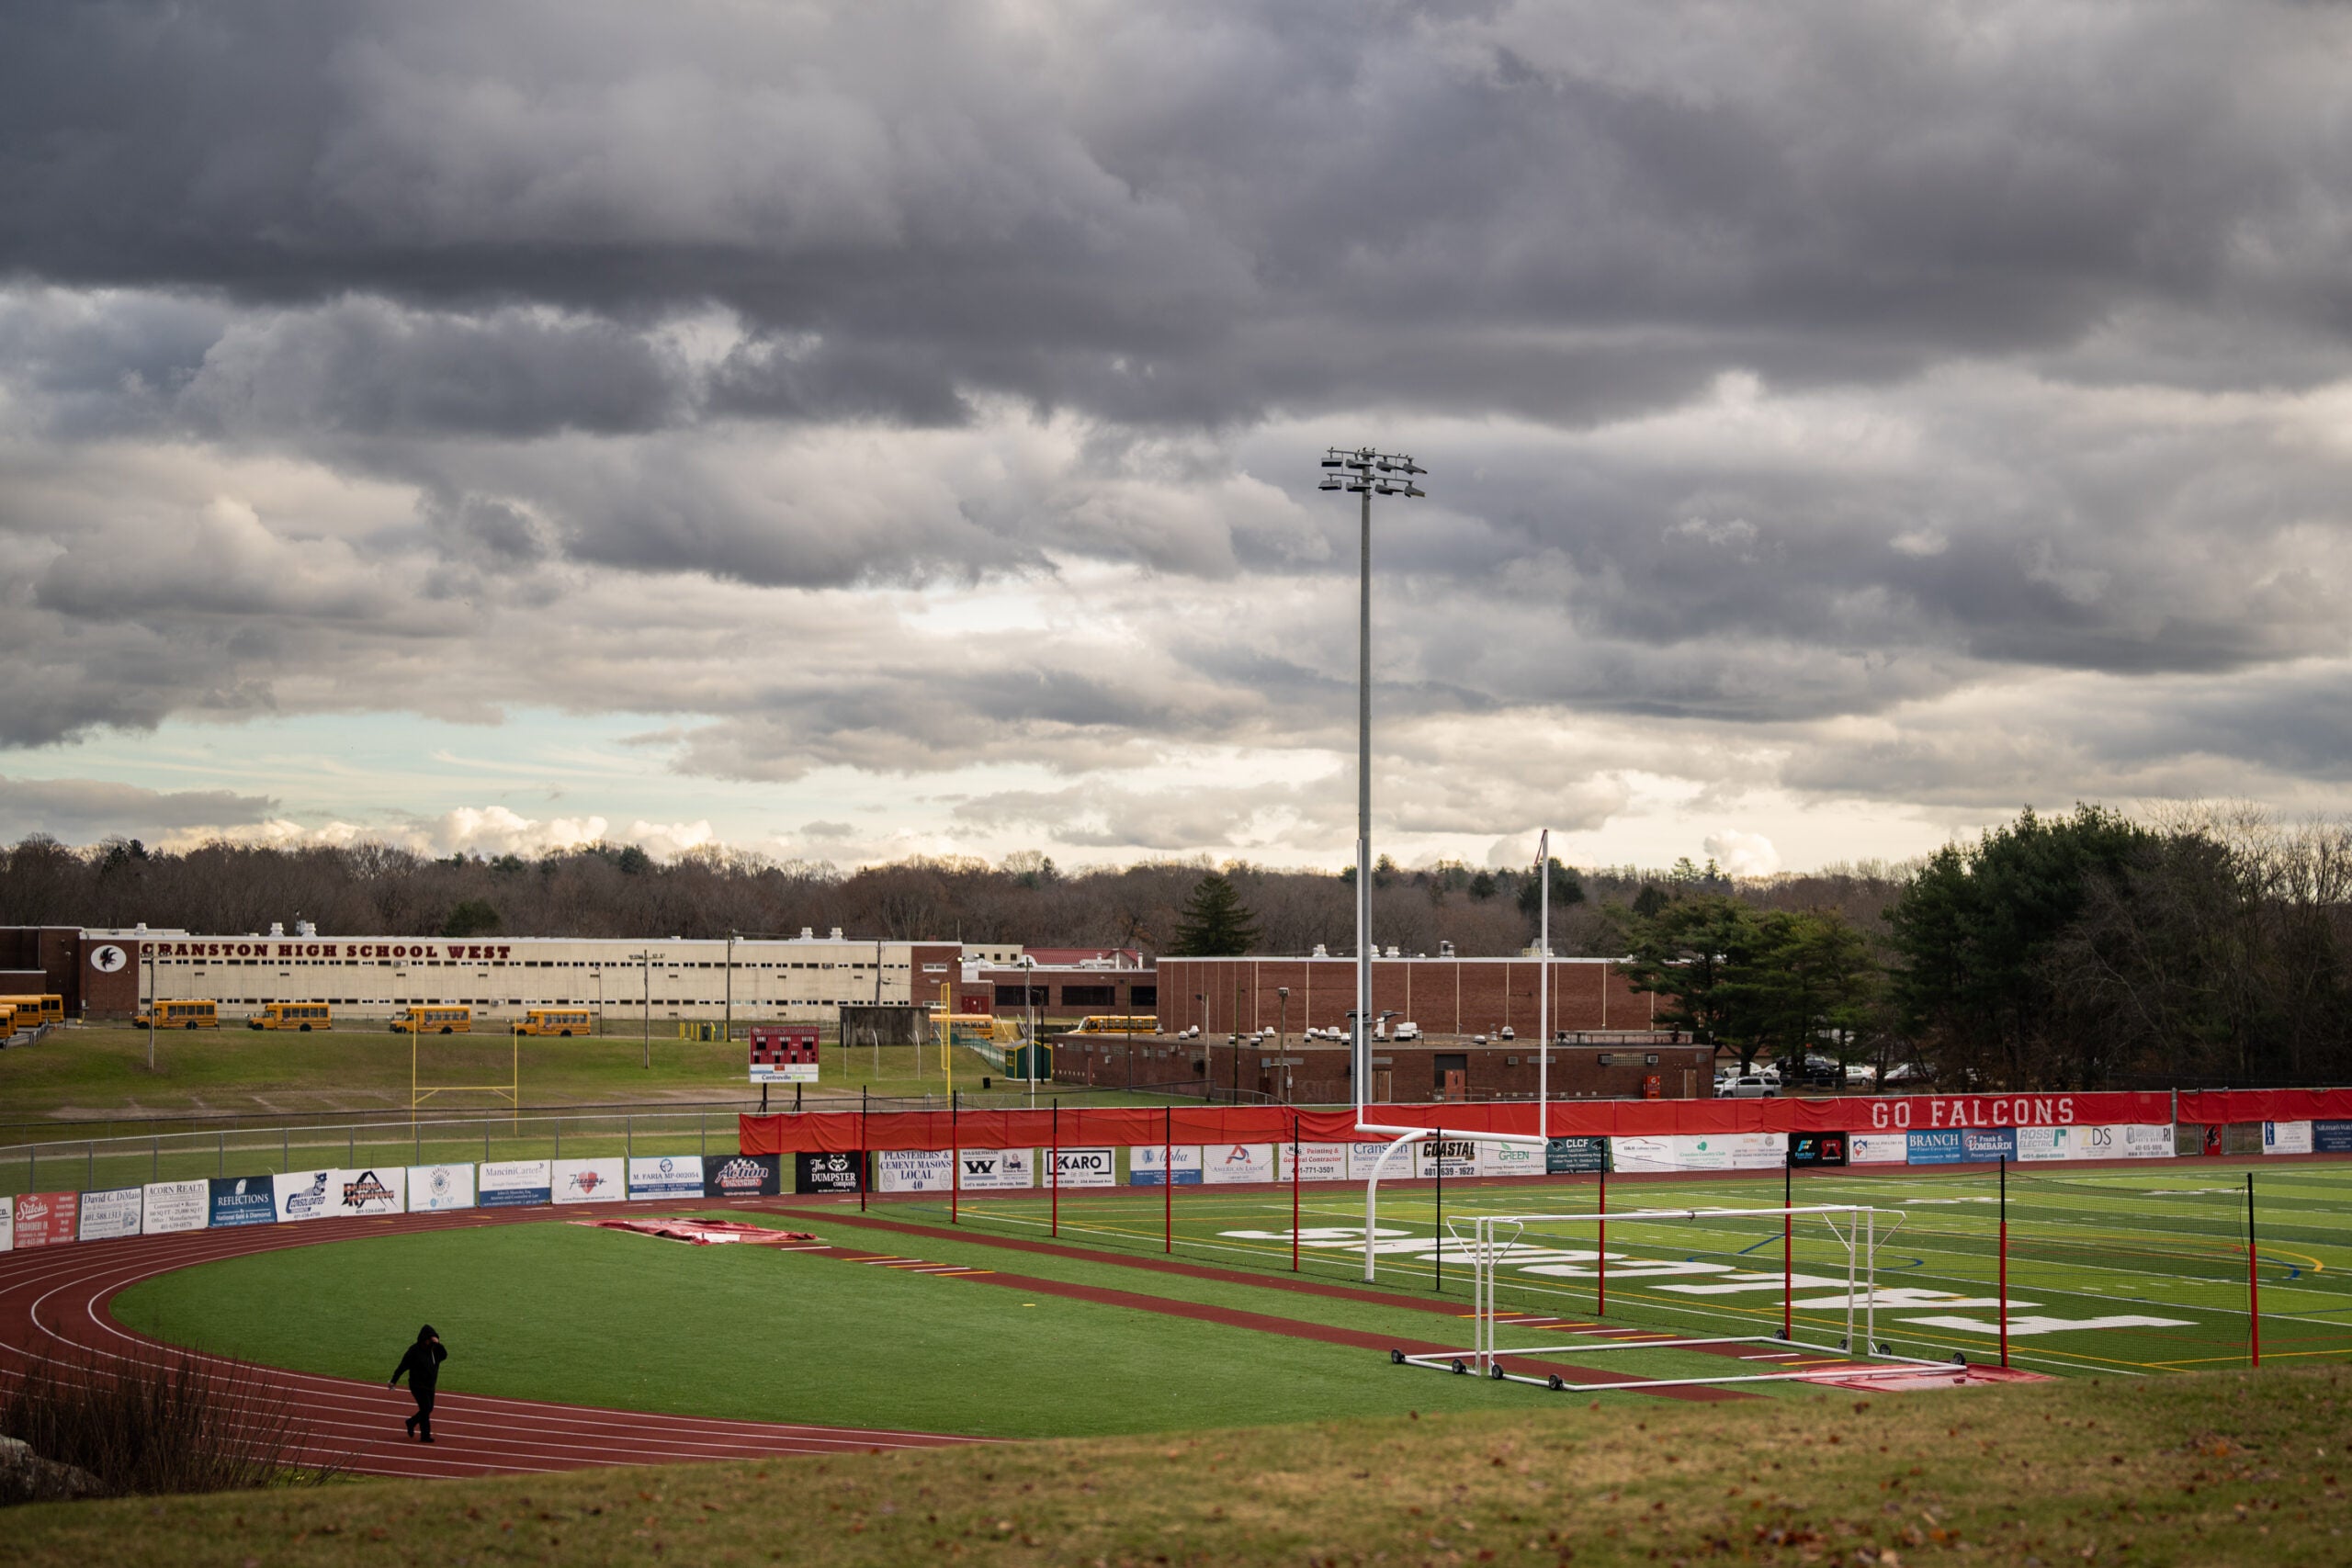 Cranston High School West and its athletic field, in Cranston, R.I.